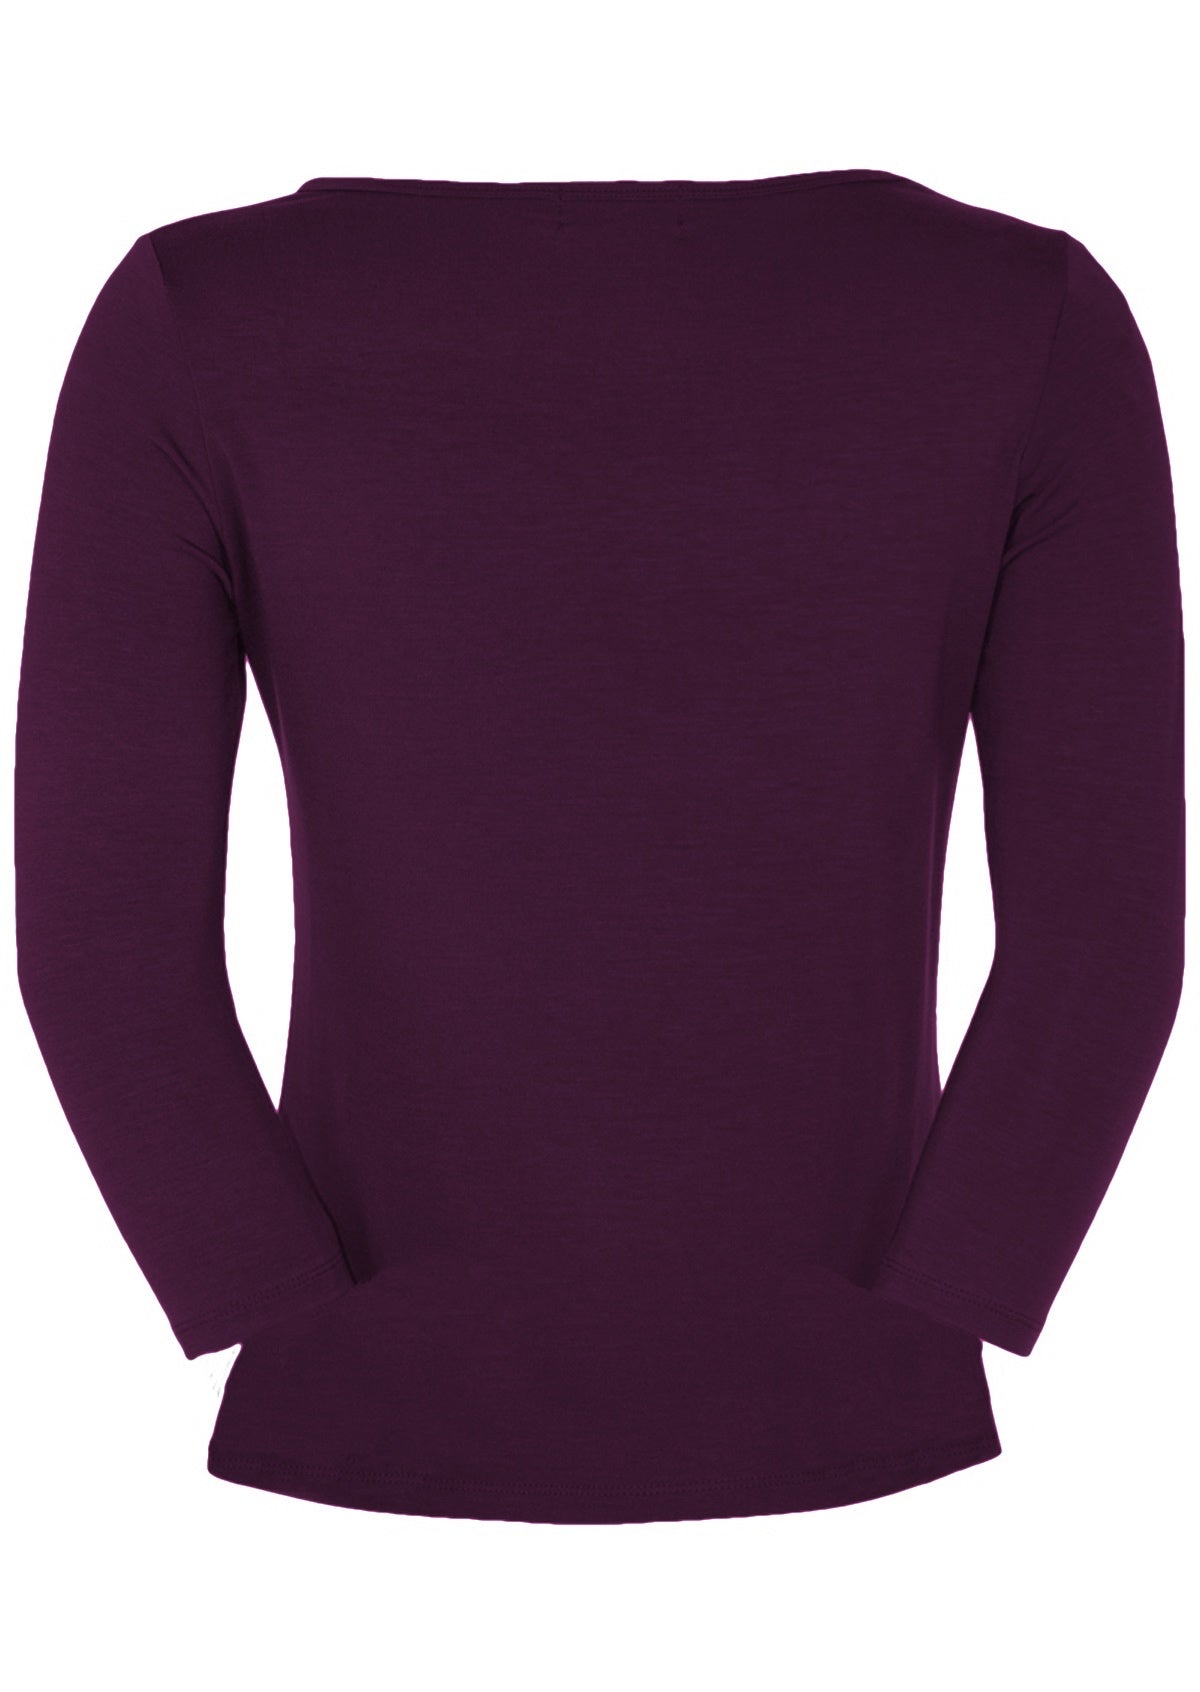 Back view of women's rayon boat neck purple 3/4 sleeve top.